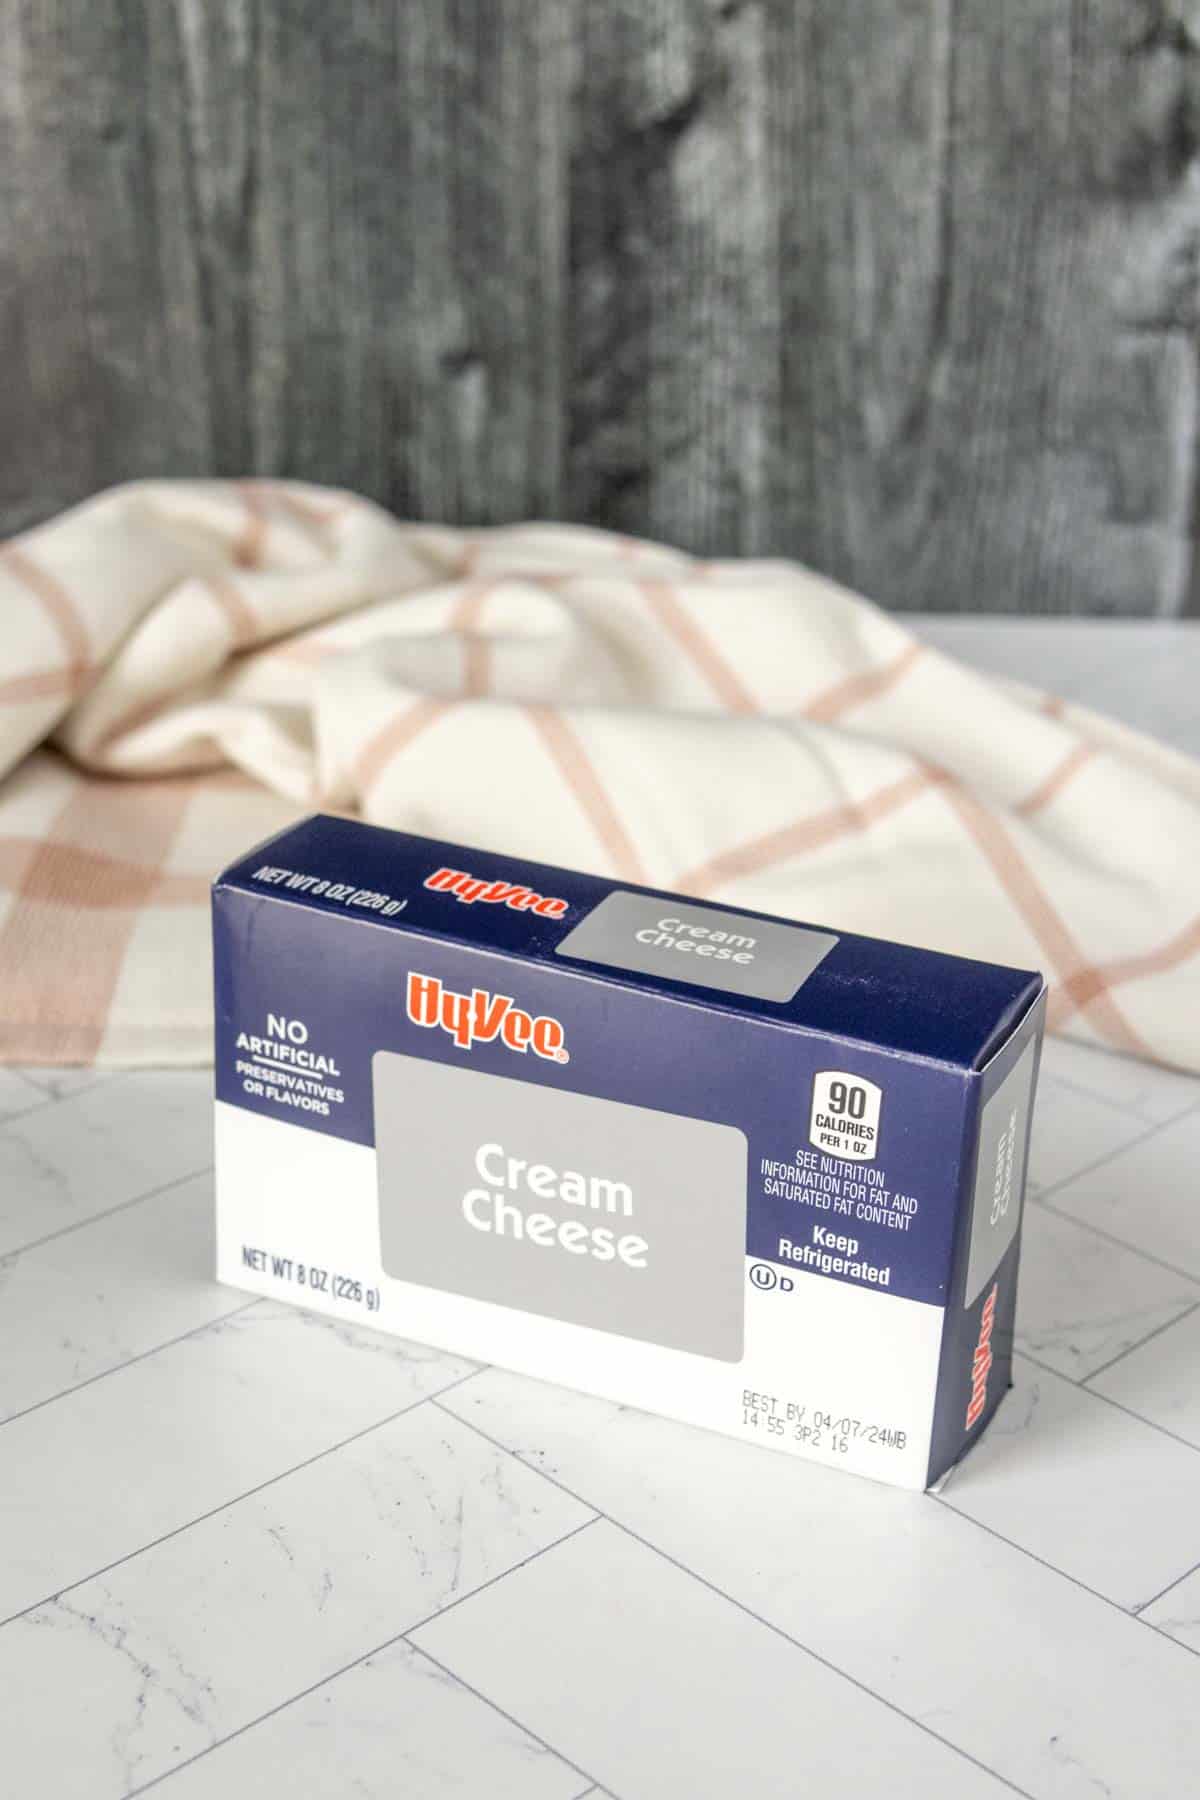 A box of cream cheese sitting on a table.